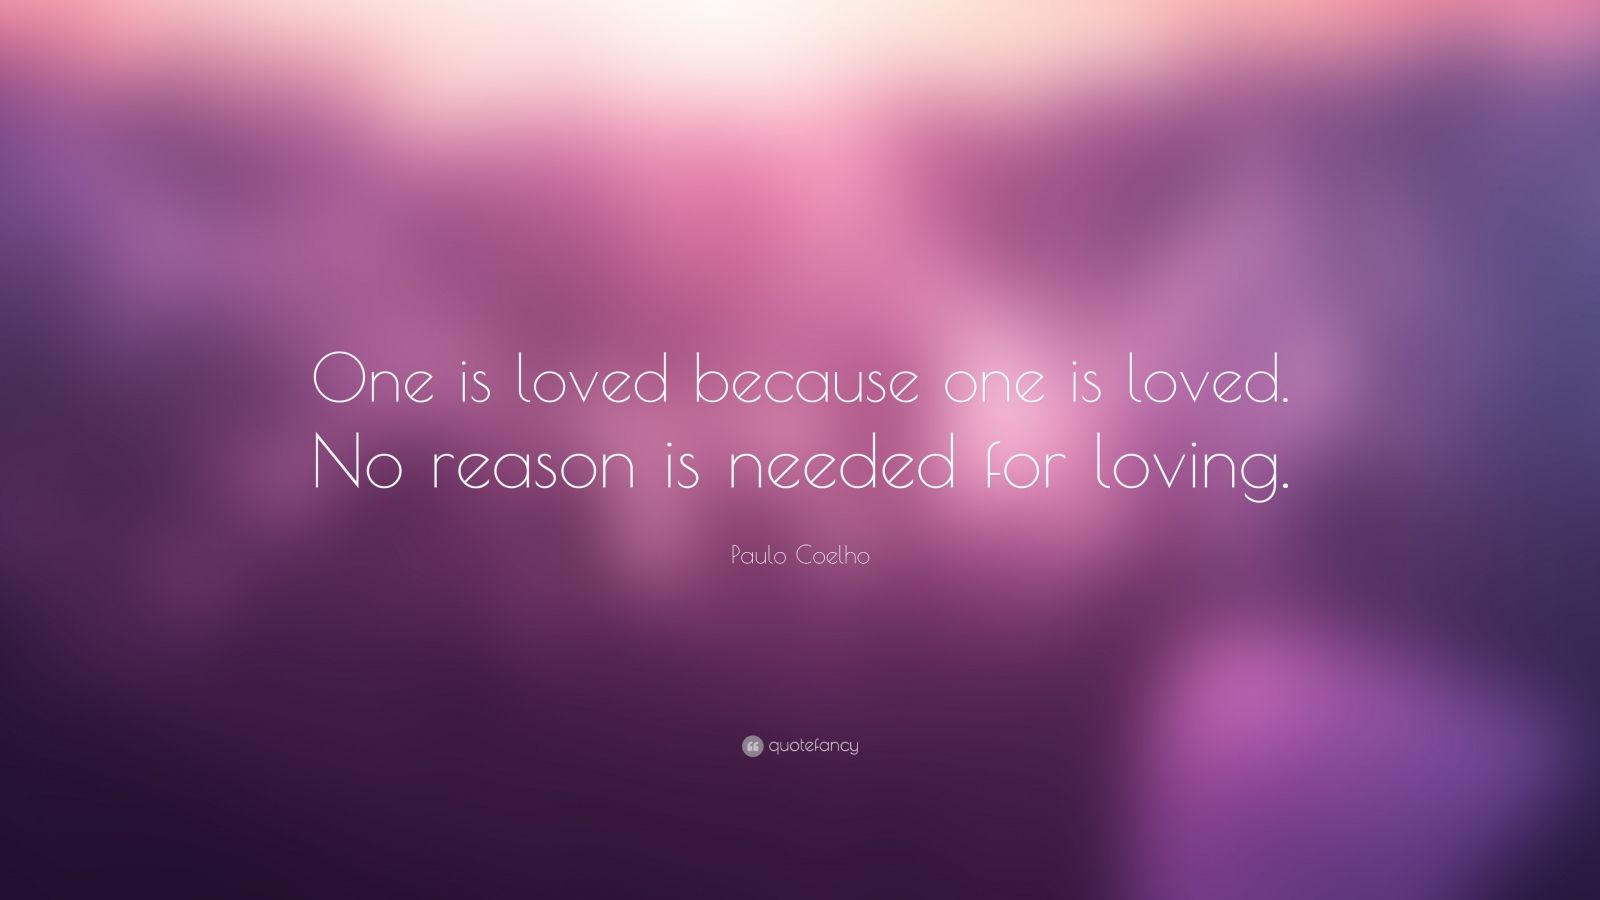 Paulo Coelho Quote “ e is loved because one is loved No reason is